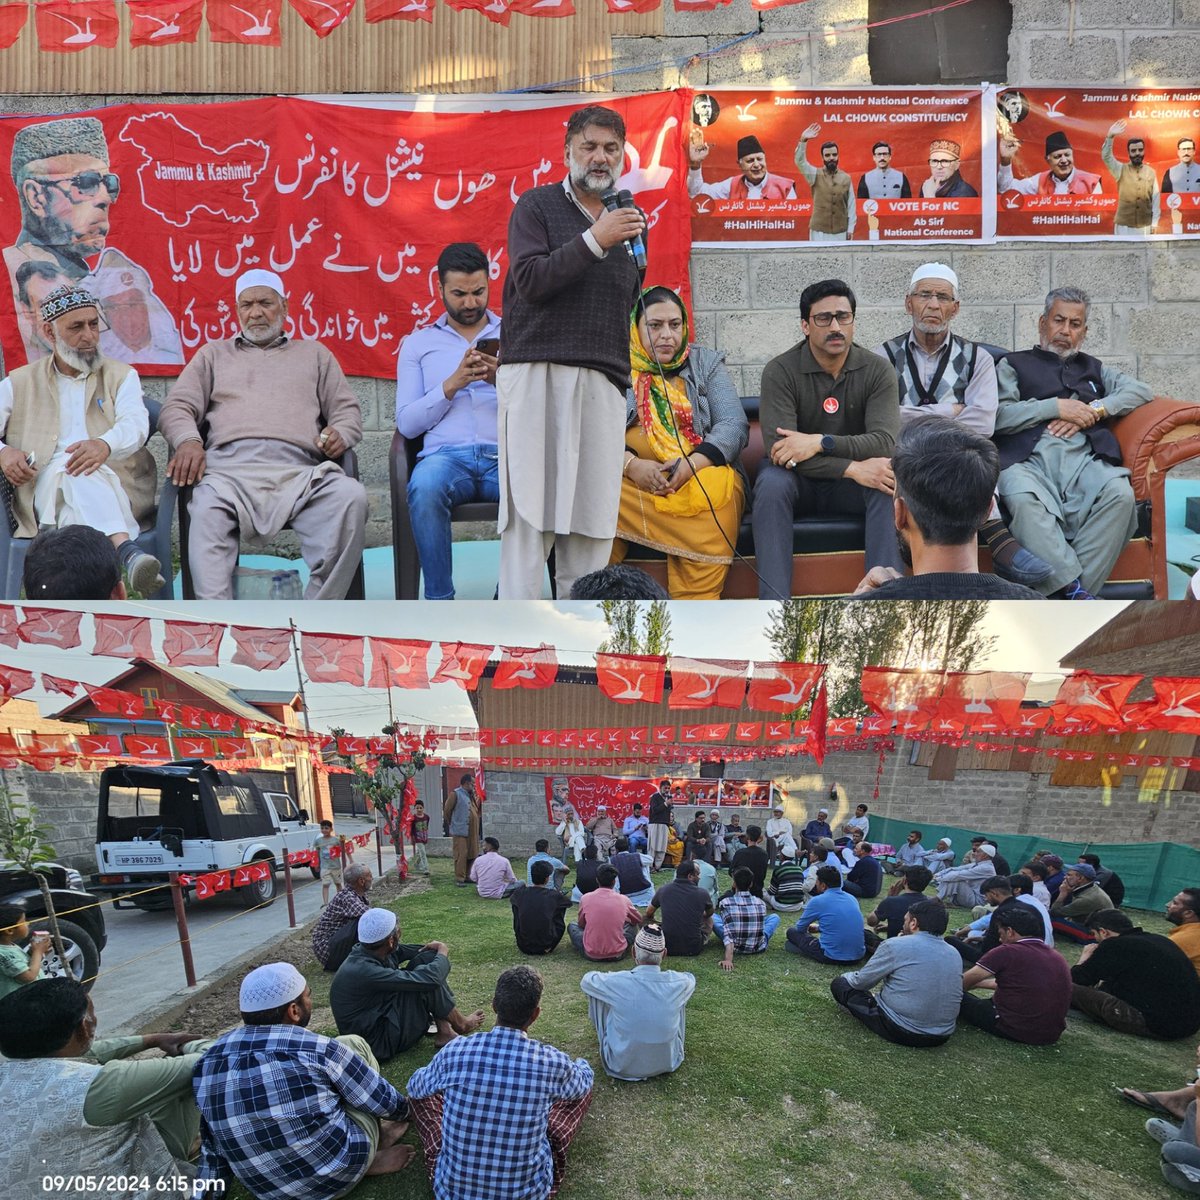 Continuing public outreach for @JKNC_
parliamentary elections candidate @ruhullahmehdi sb presided over meeting at khanmouh in Lal chowk Constituency
Urged people to support and vote for #nationalconference